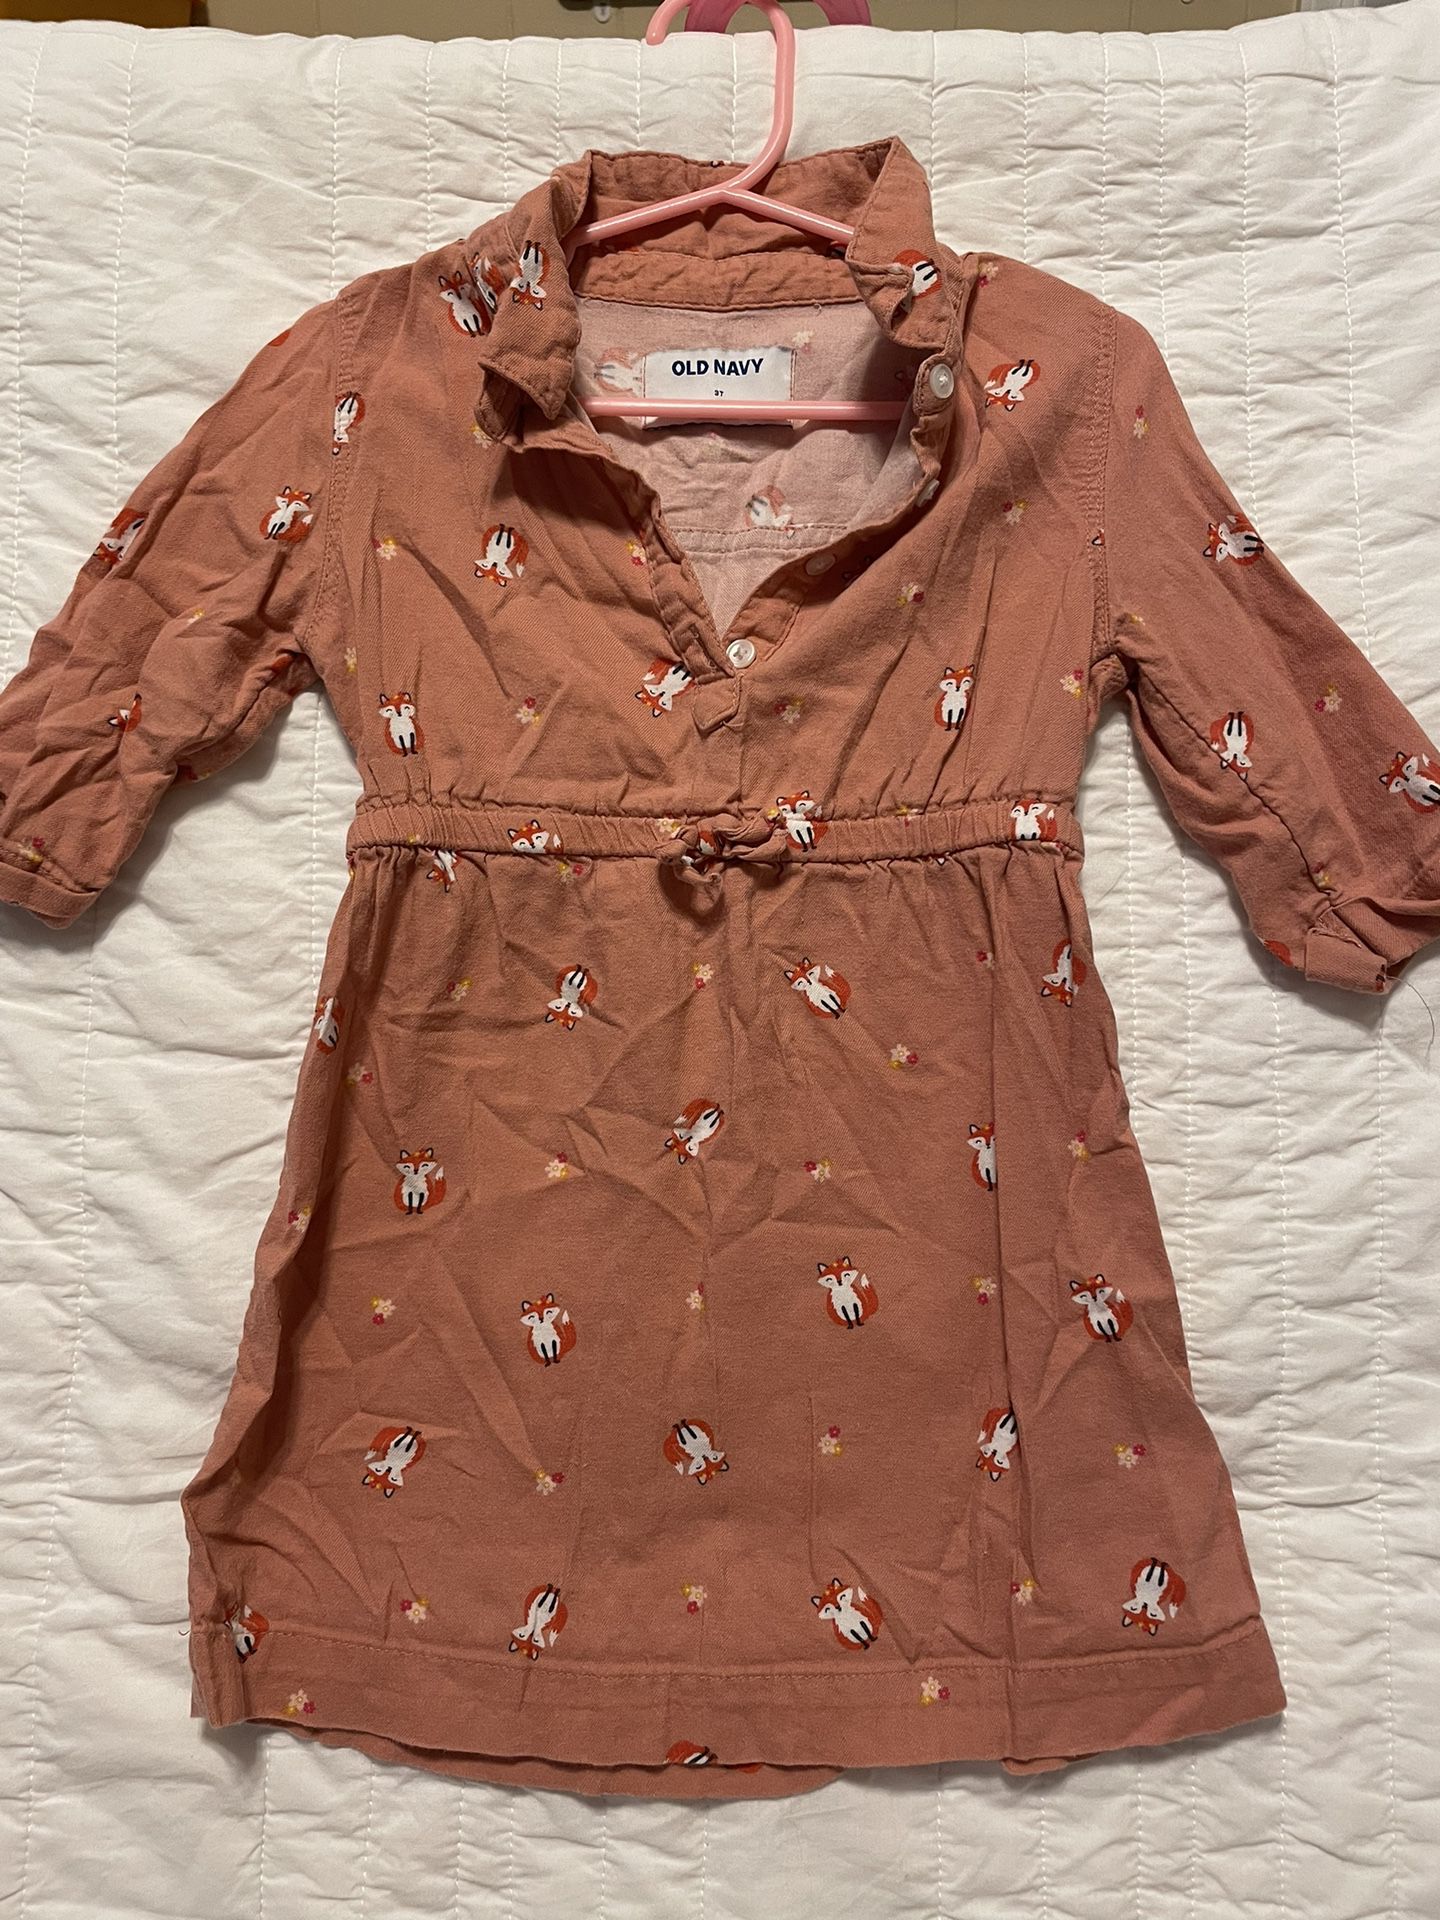 Old Navy Pink Fox Toddler Dress Size 3T